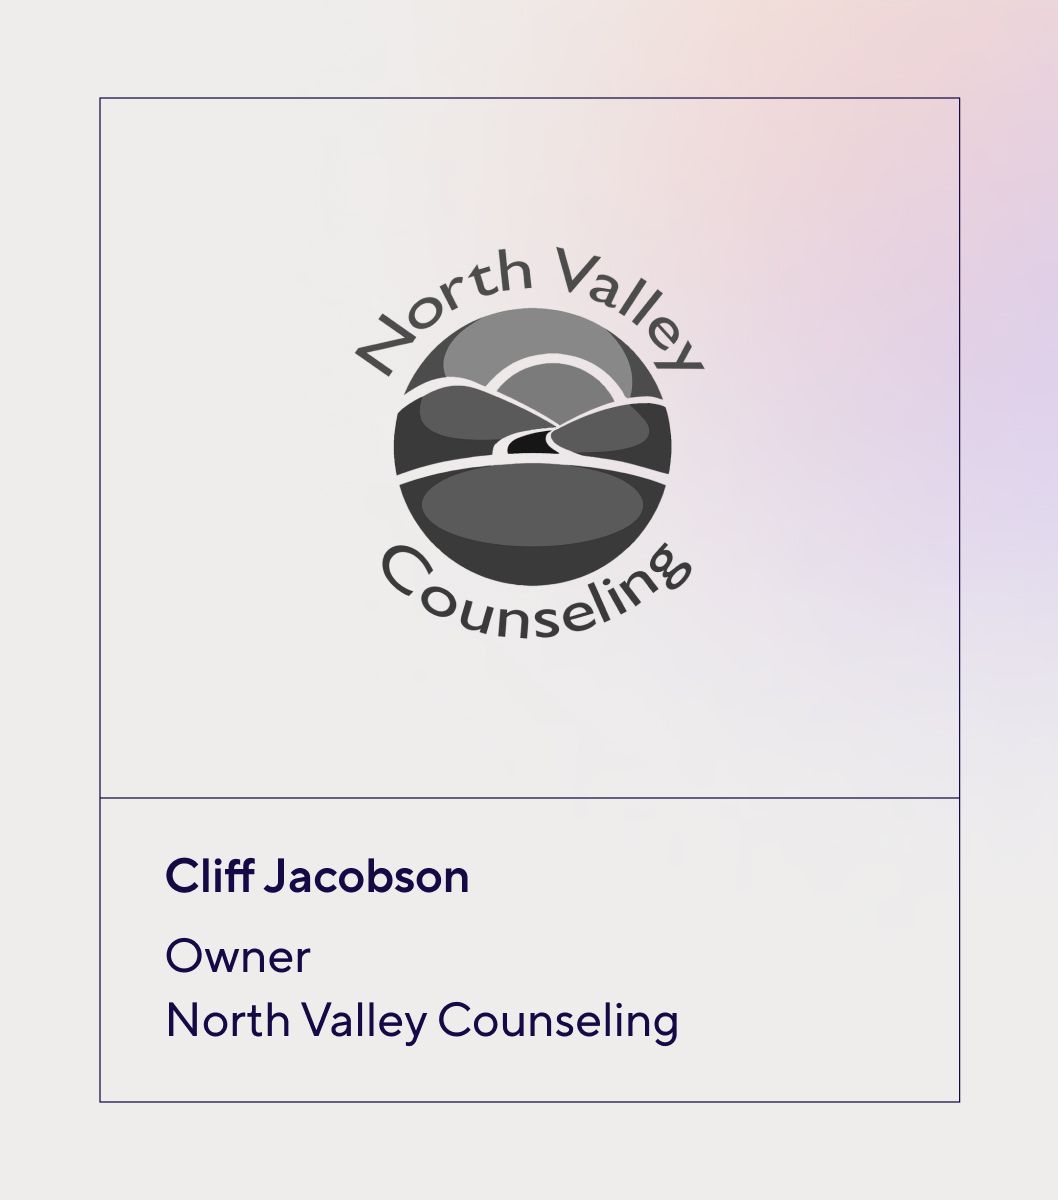 Card with North Valley Counseling